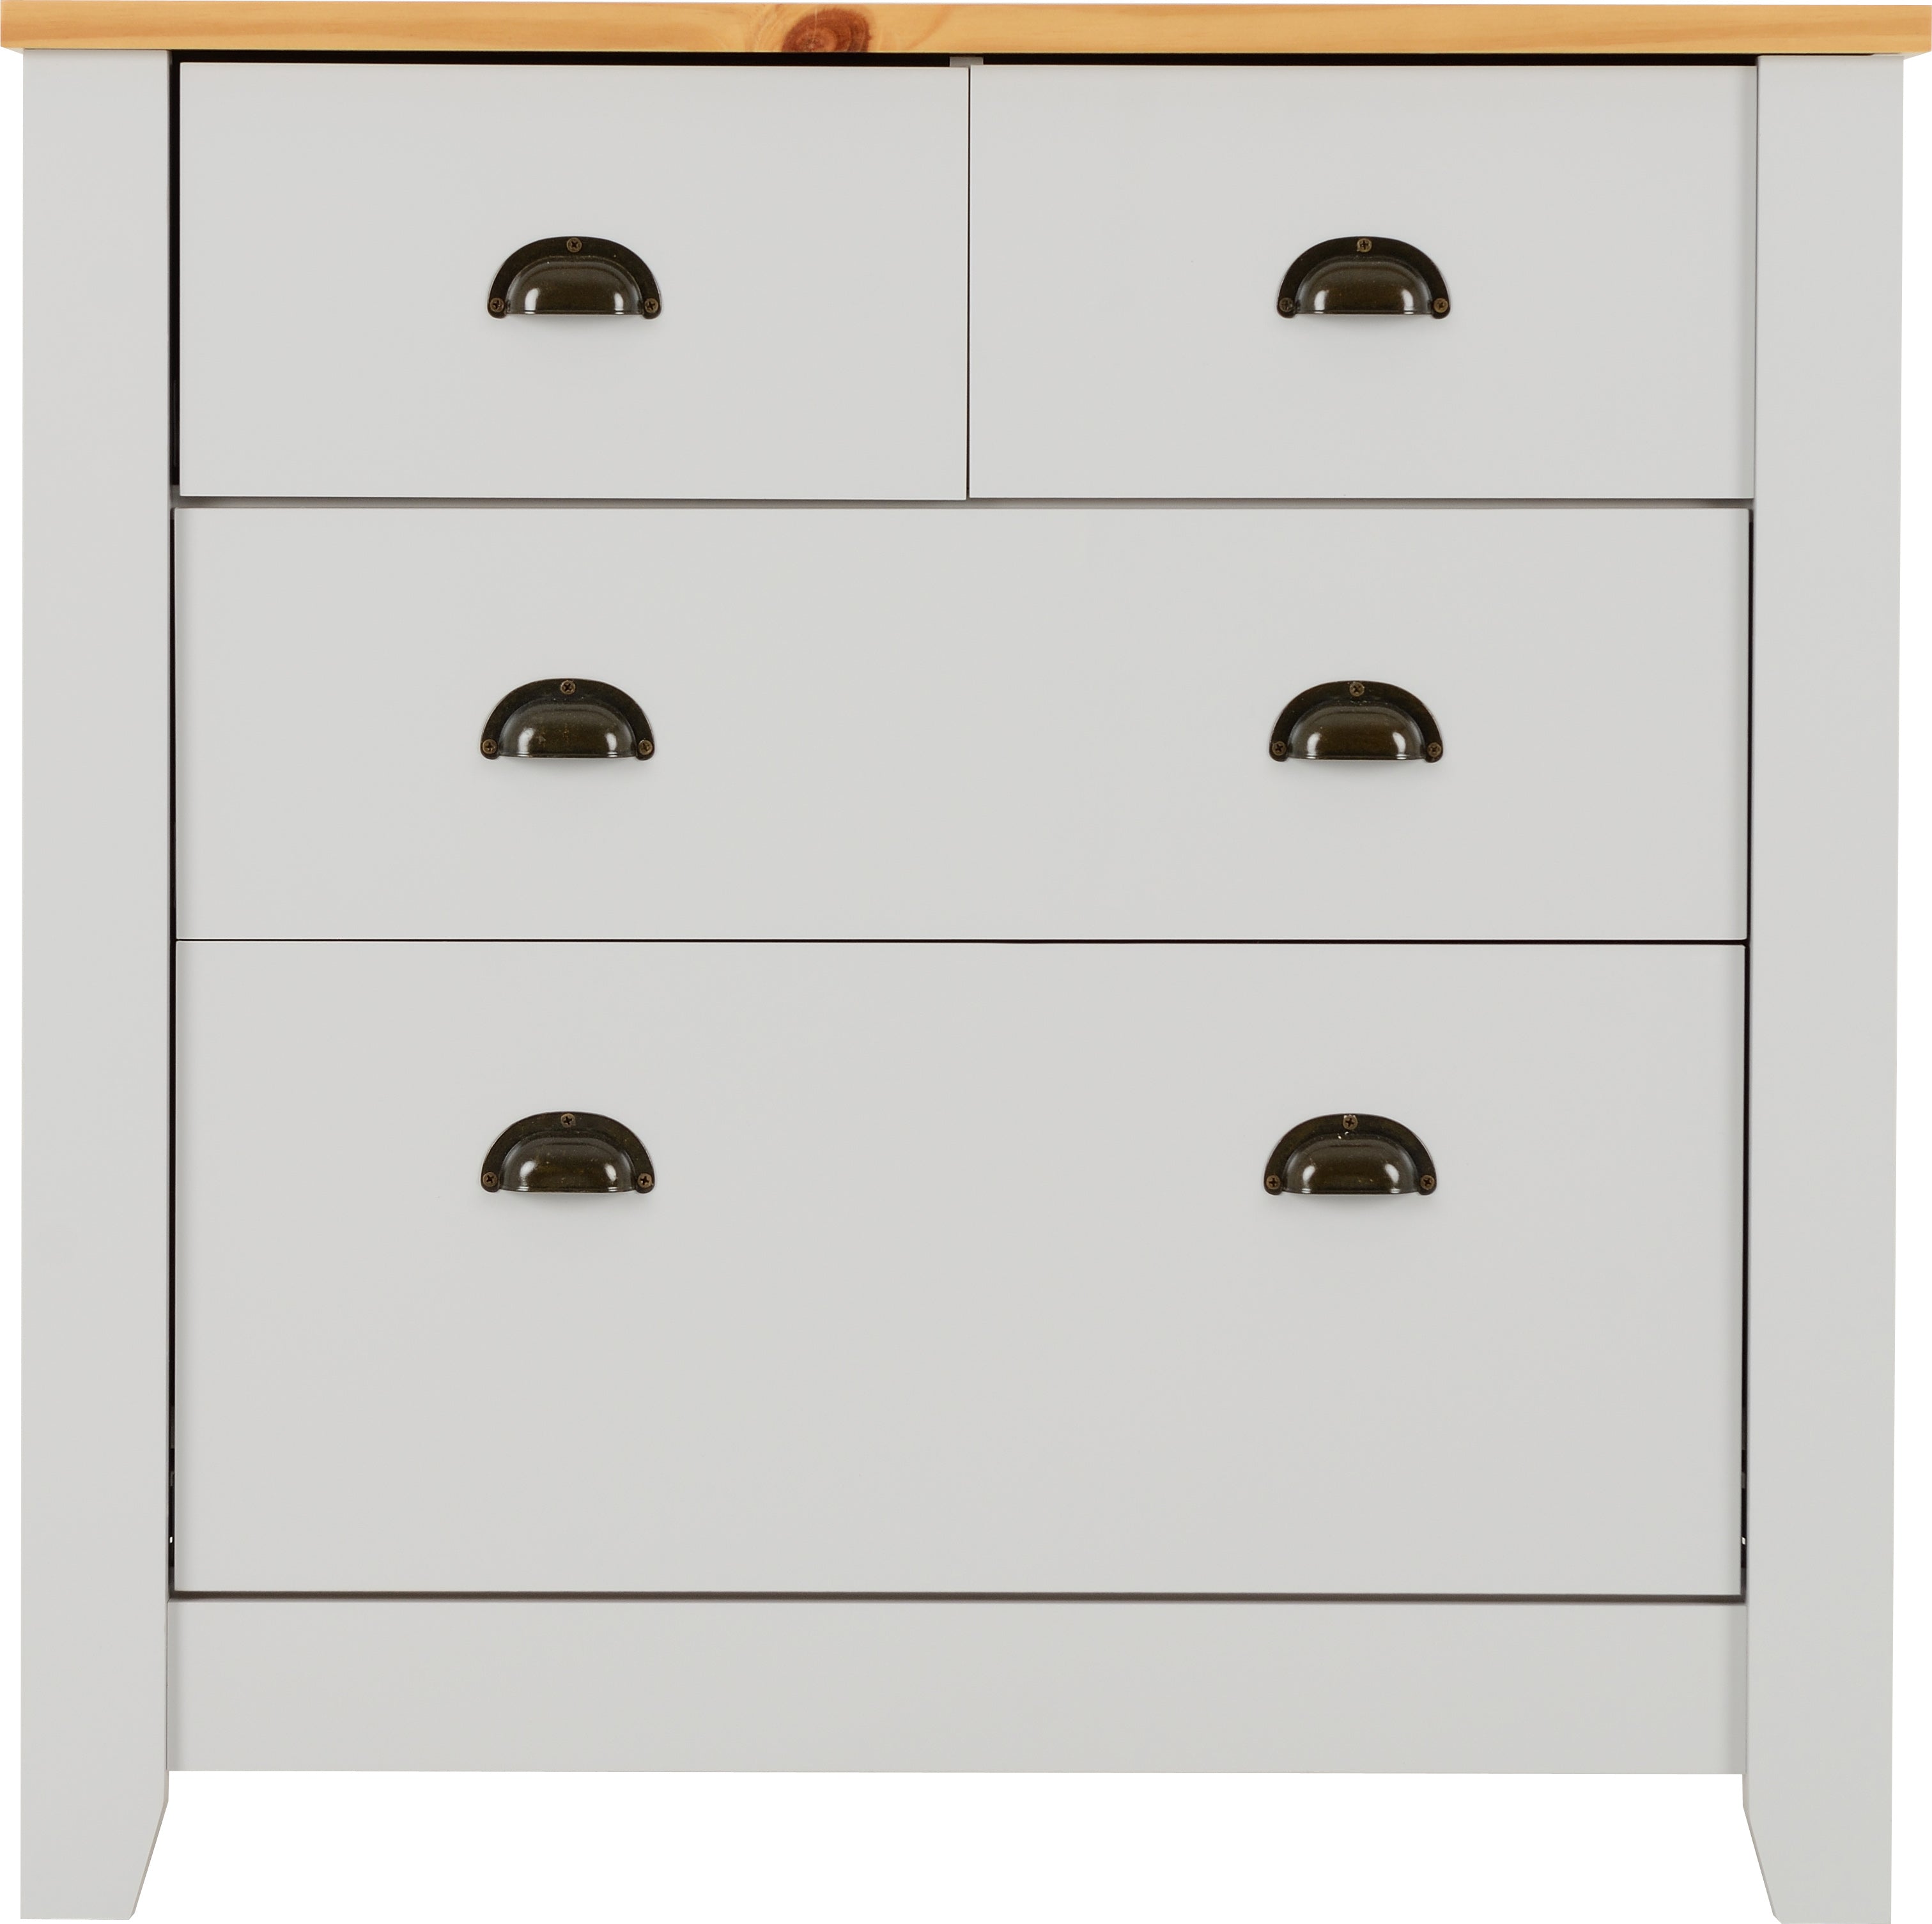 grey chest of drawers